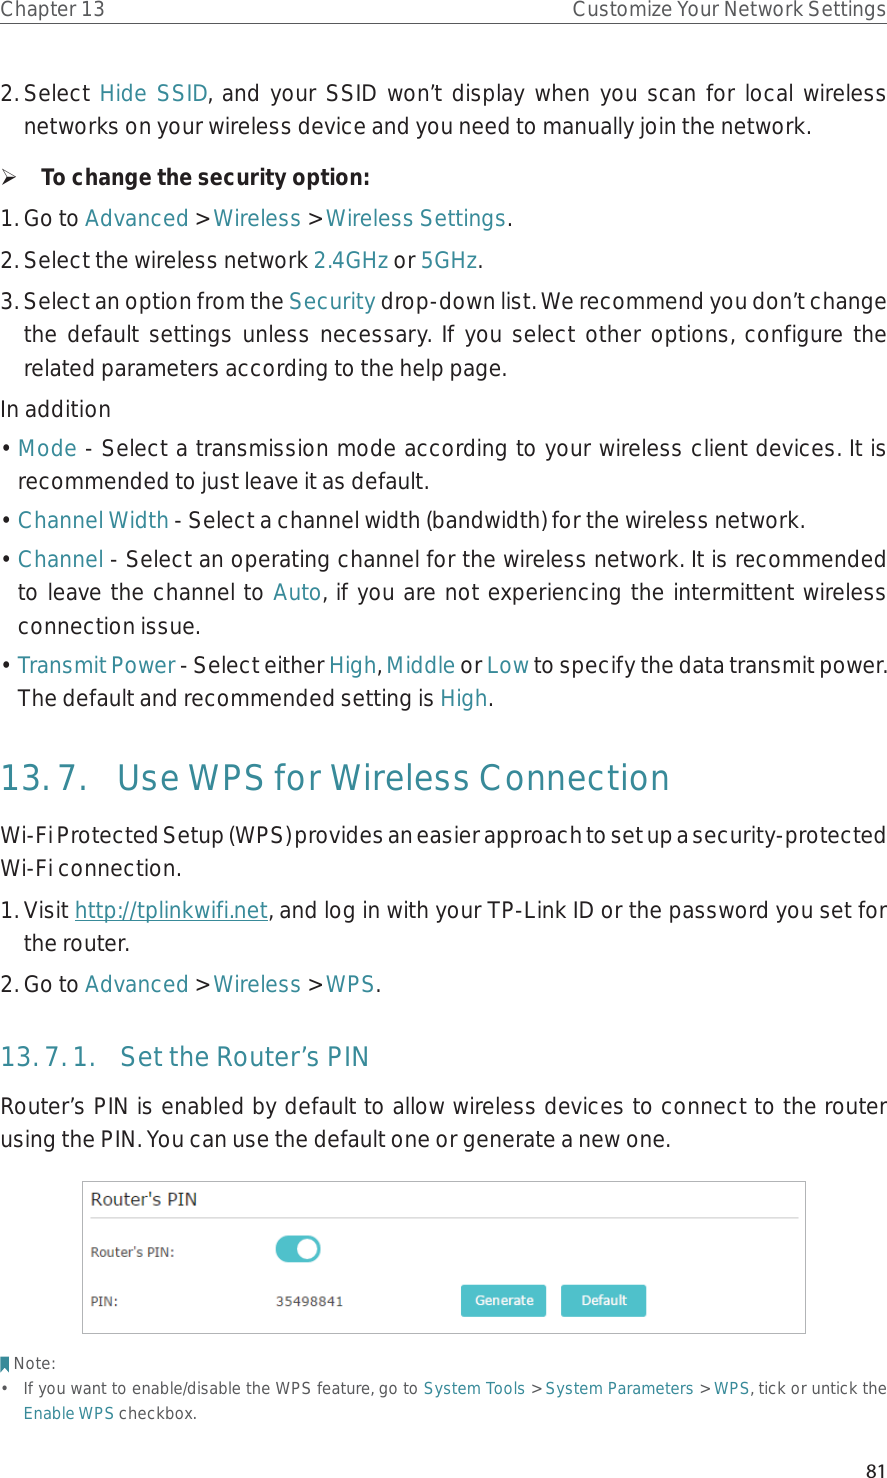 81Chapter 13 Customize Your Network Settings2. Select  Hide SSID, and your SSID won’t display when you scan for local wireless networks on your wireless device and you need to manually join the network. ¾To change the security option:1. Go to Advanced &gt; Wireless &gt; Wireless Settings. 2. Select the wireless network 2.4GHz or 5GHz.3. Select an option from the Security drop-down list. We recommend you don’t change the default settings unless necessary. If you select other options, configure the related parameters according to the help page.In addition• Mode - Select a transmission mode according to your wireless client devices. It is recommended to just leave it as default.• Channel Width - Select a channel width (bandwidth) for the wireless network.• Channel - Select an operating channel for the wireless network. It is recommended to leave the channel to Auto, if you are not experiencing the intermittent wireless connection issue.• Transmit Power - Select either High, Middle or Low to specify the data transmit power. The default and recommended setting is High.13. 7.  Use WPS for Wireless ConnectionWi-Fi Protected Setup (WPS) provides an easier approach to set up a security-protected Wi-Fi connection.1. Visit http://tplinkwifi.net, and log in with your TP-Link ID or the password you set for the router.2. Go to Advanced &gt; Wireless &gt; WPS.13. 7. 1.  Set the Router’s PINRouter’s PIN is enabled by default to allow wireless devices to connect to the router using the PIN. You can use the default one or generate a new one.Note:•  If you want to enable/disable the WPS feature, go to System Tools &gt; System Parameters &gt; WPS, tick or untick the Enable WPS checkbox.